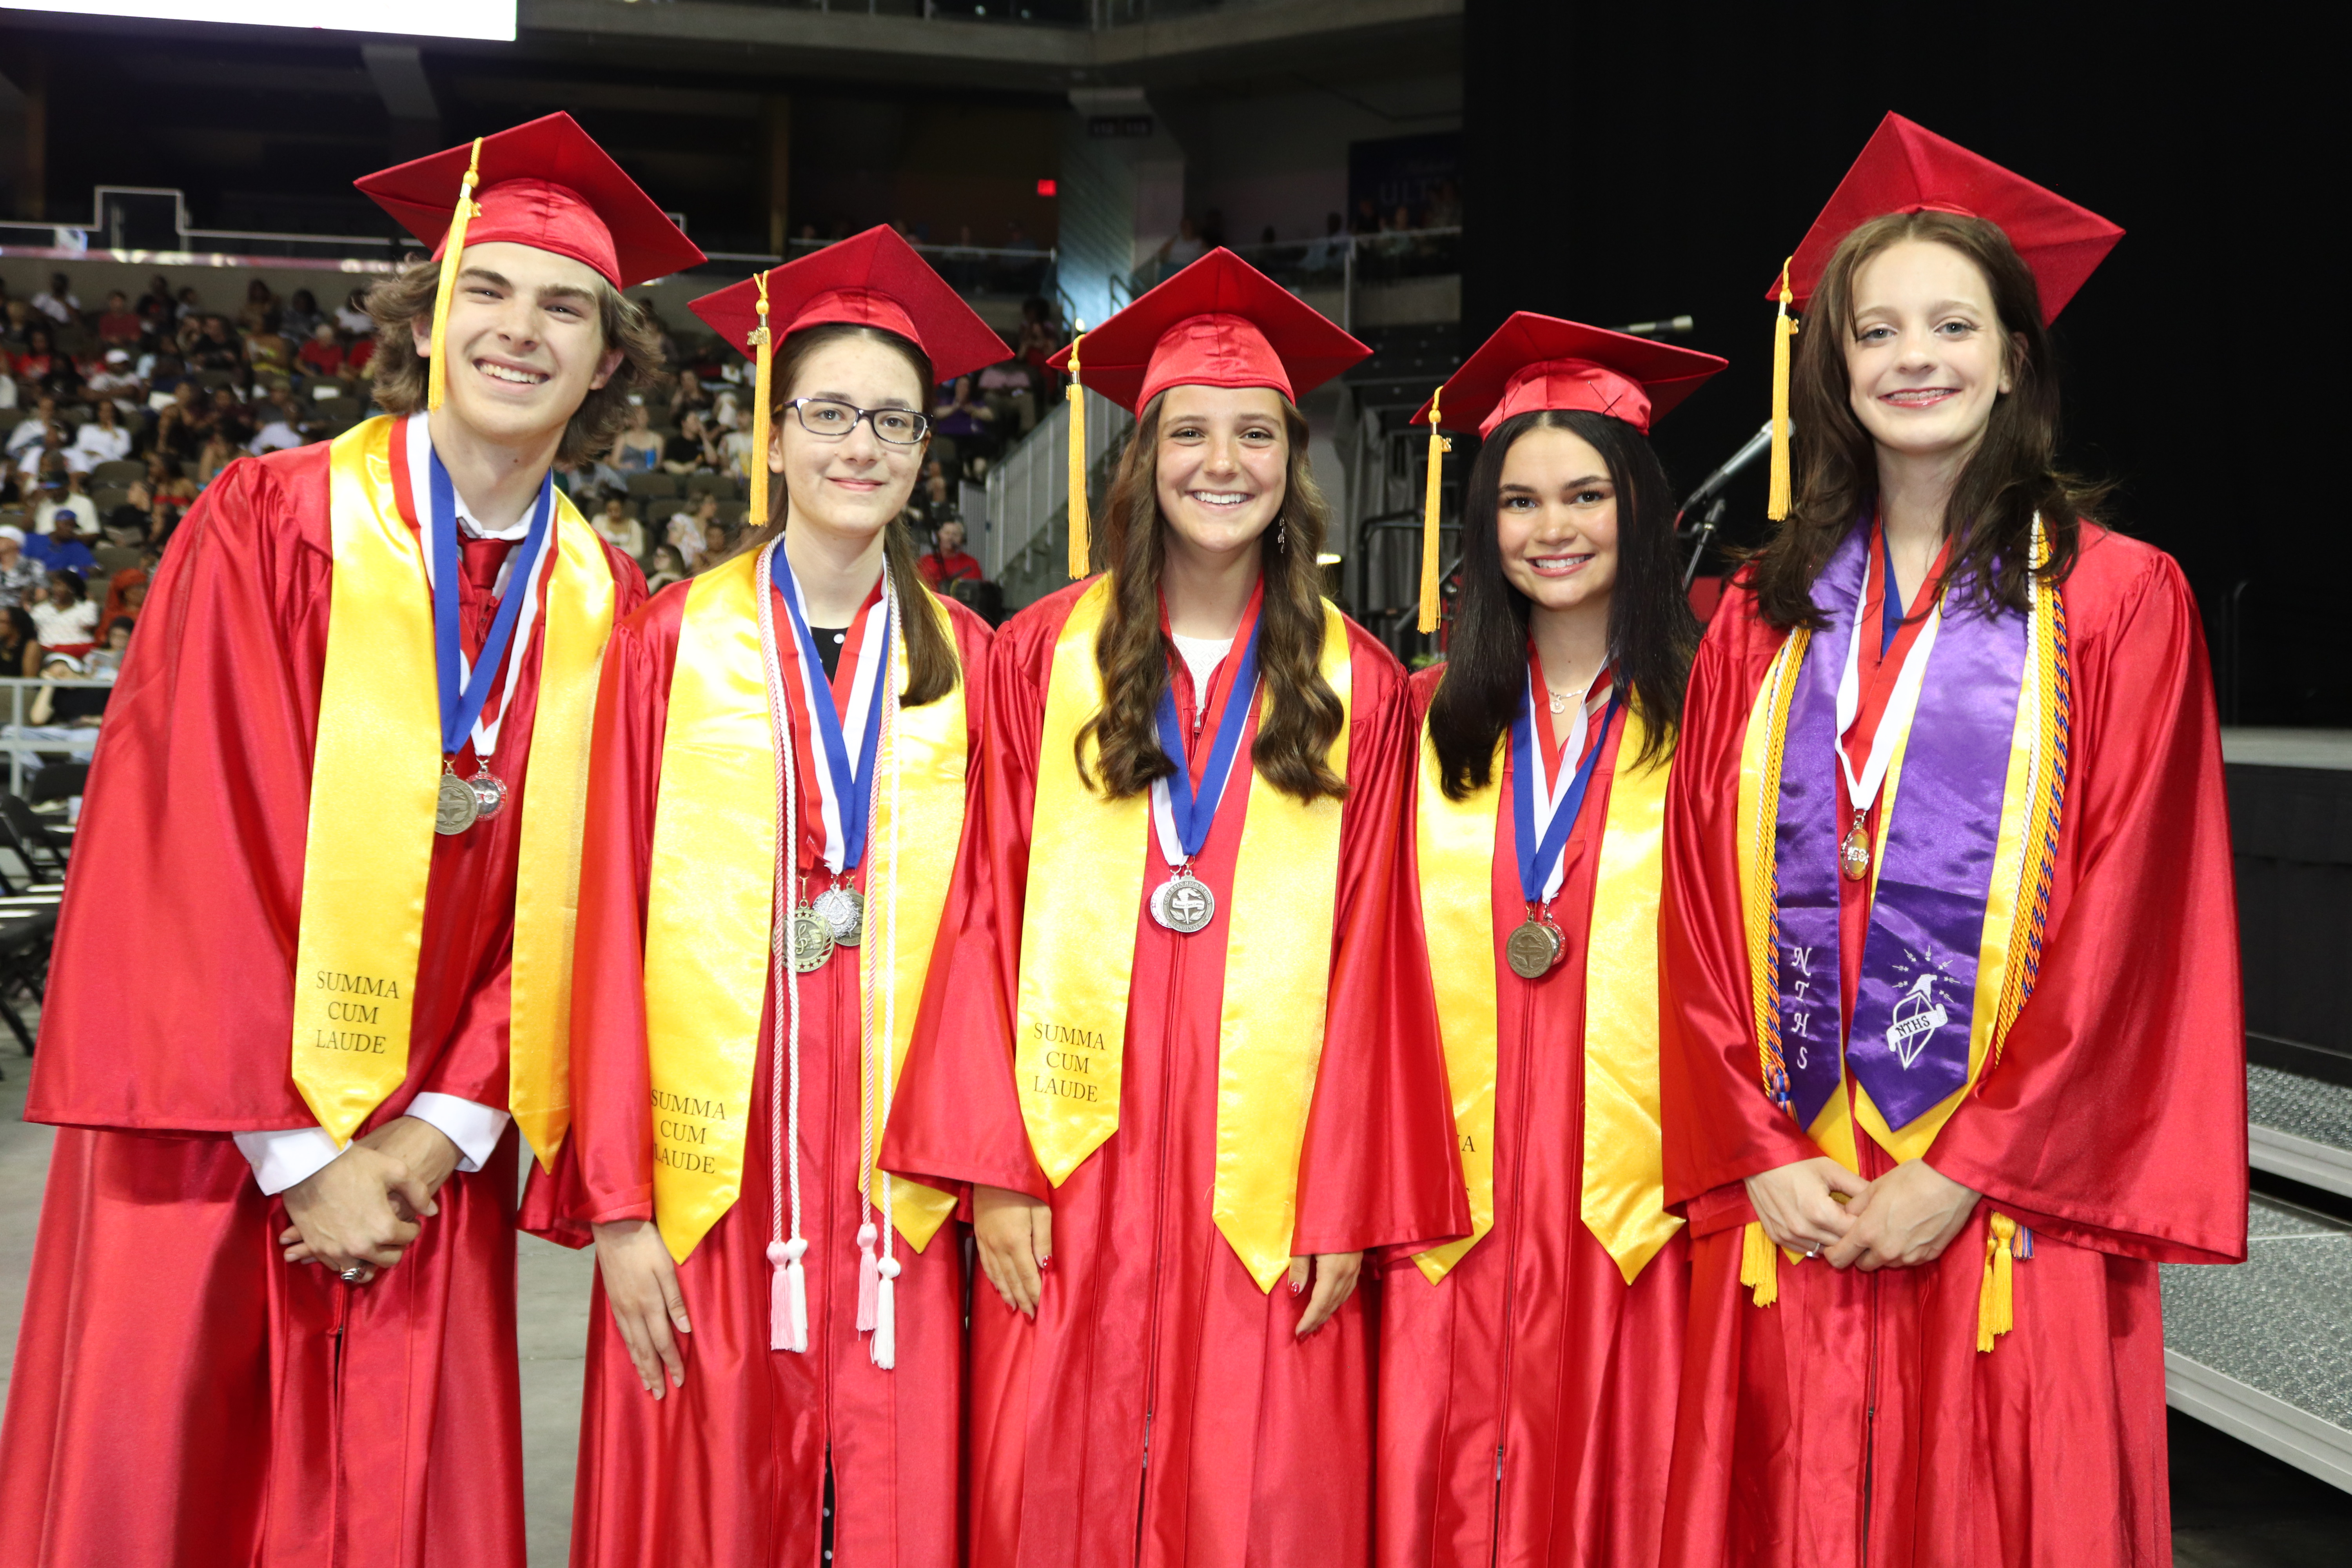 Five Colerain High School Graduates at graduation in their caps and gowns who have their gold stoles on.